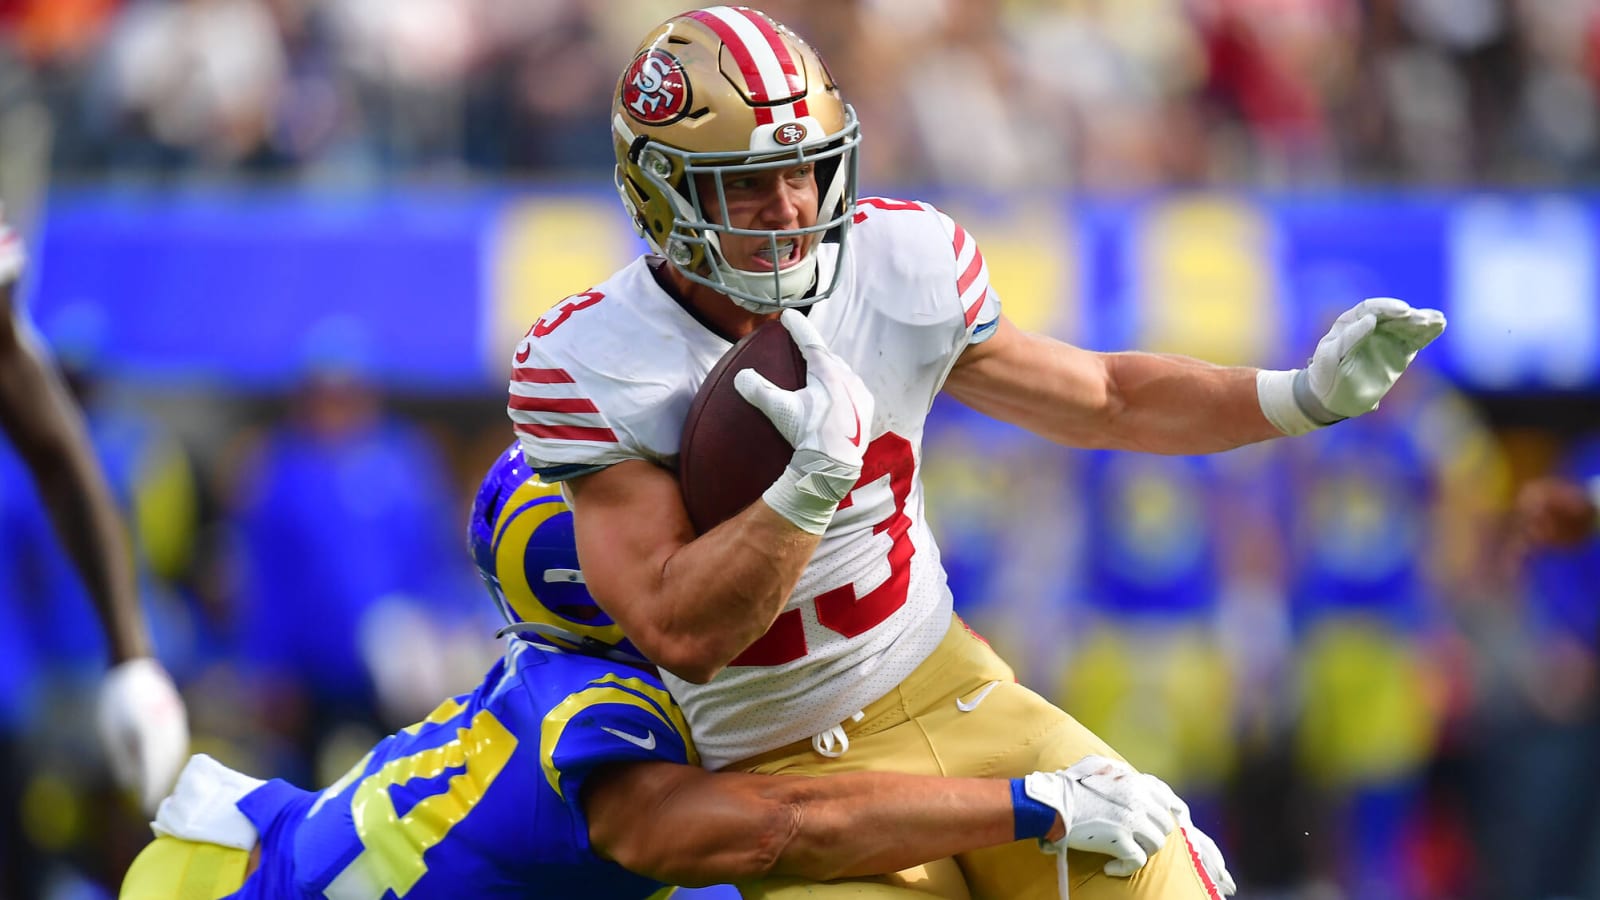 How to watch 49ers at Rams on October 30, 2022